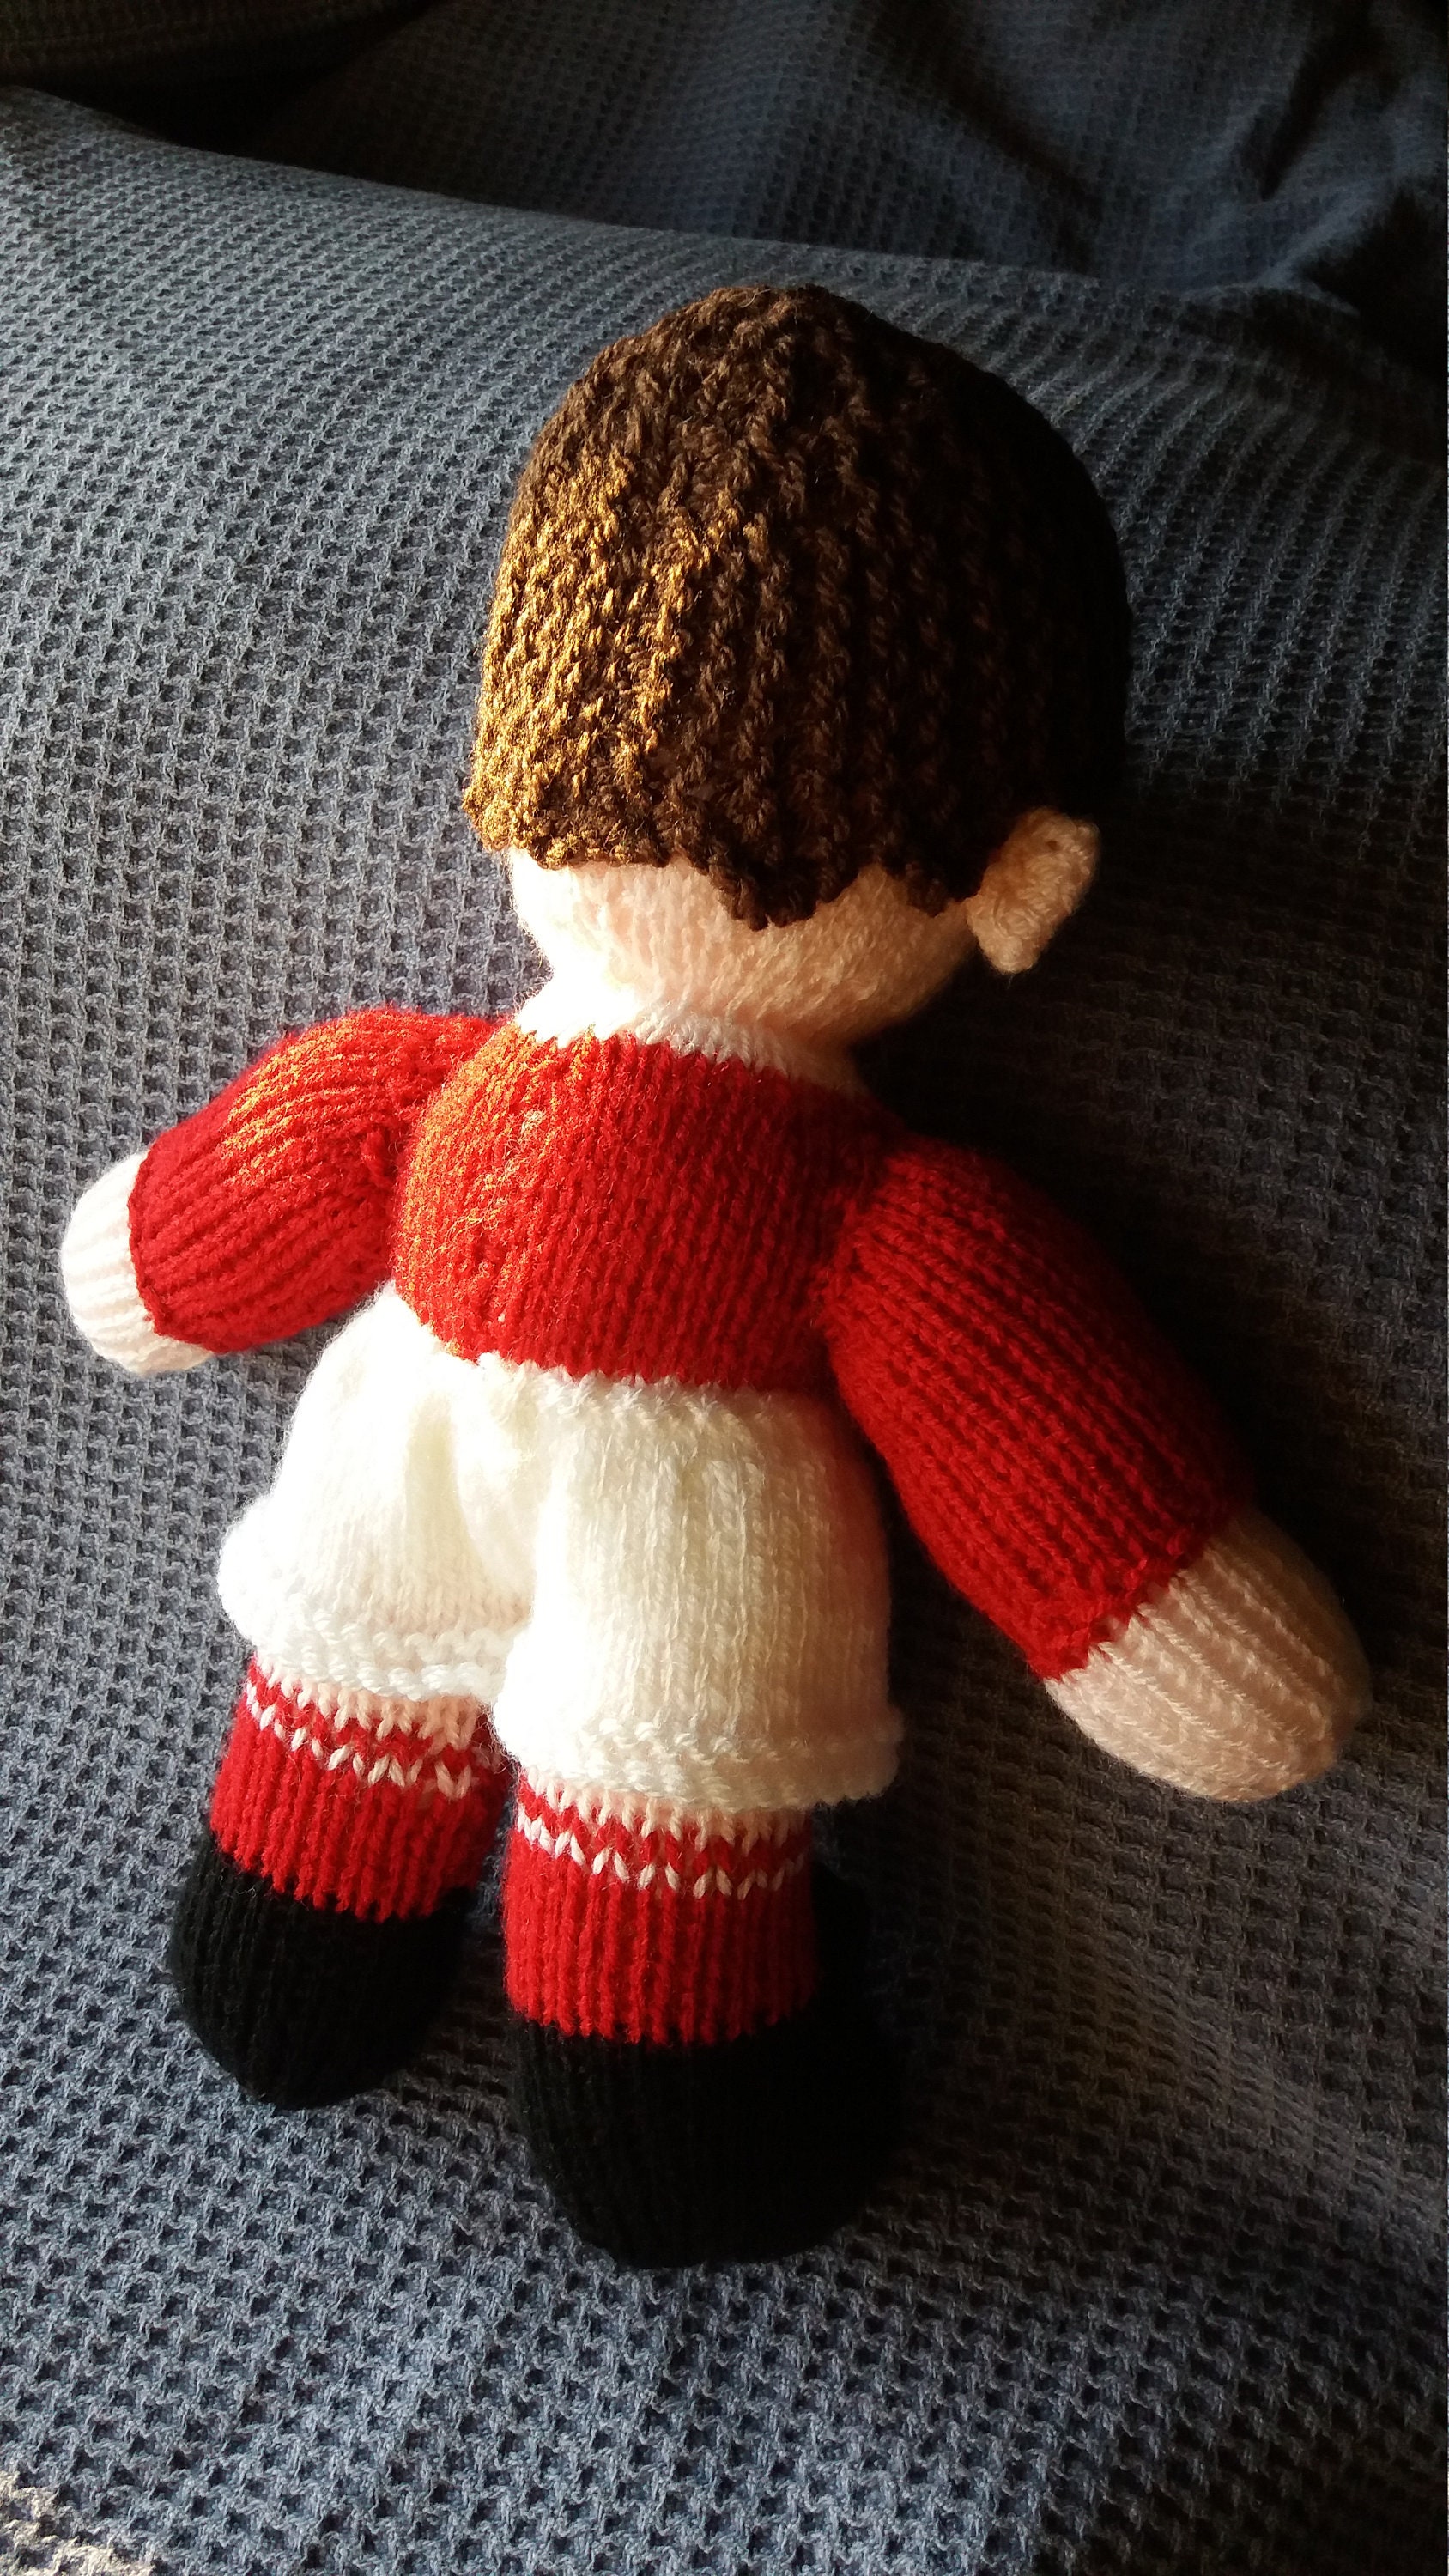 Unique Gift footballer soccer boy doll Hand Knitted football Doll soft Toy 